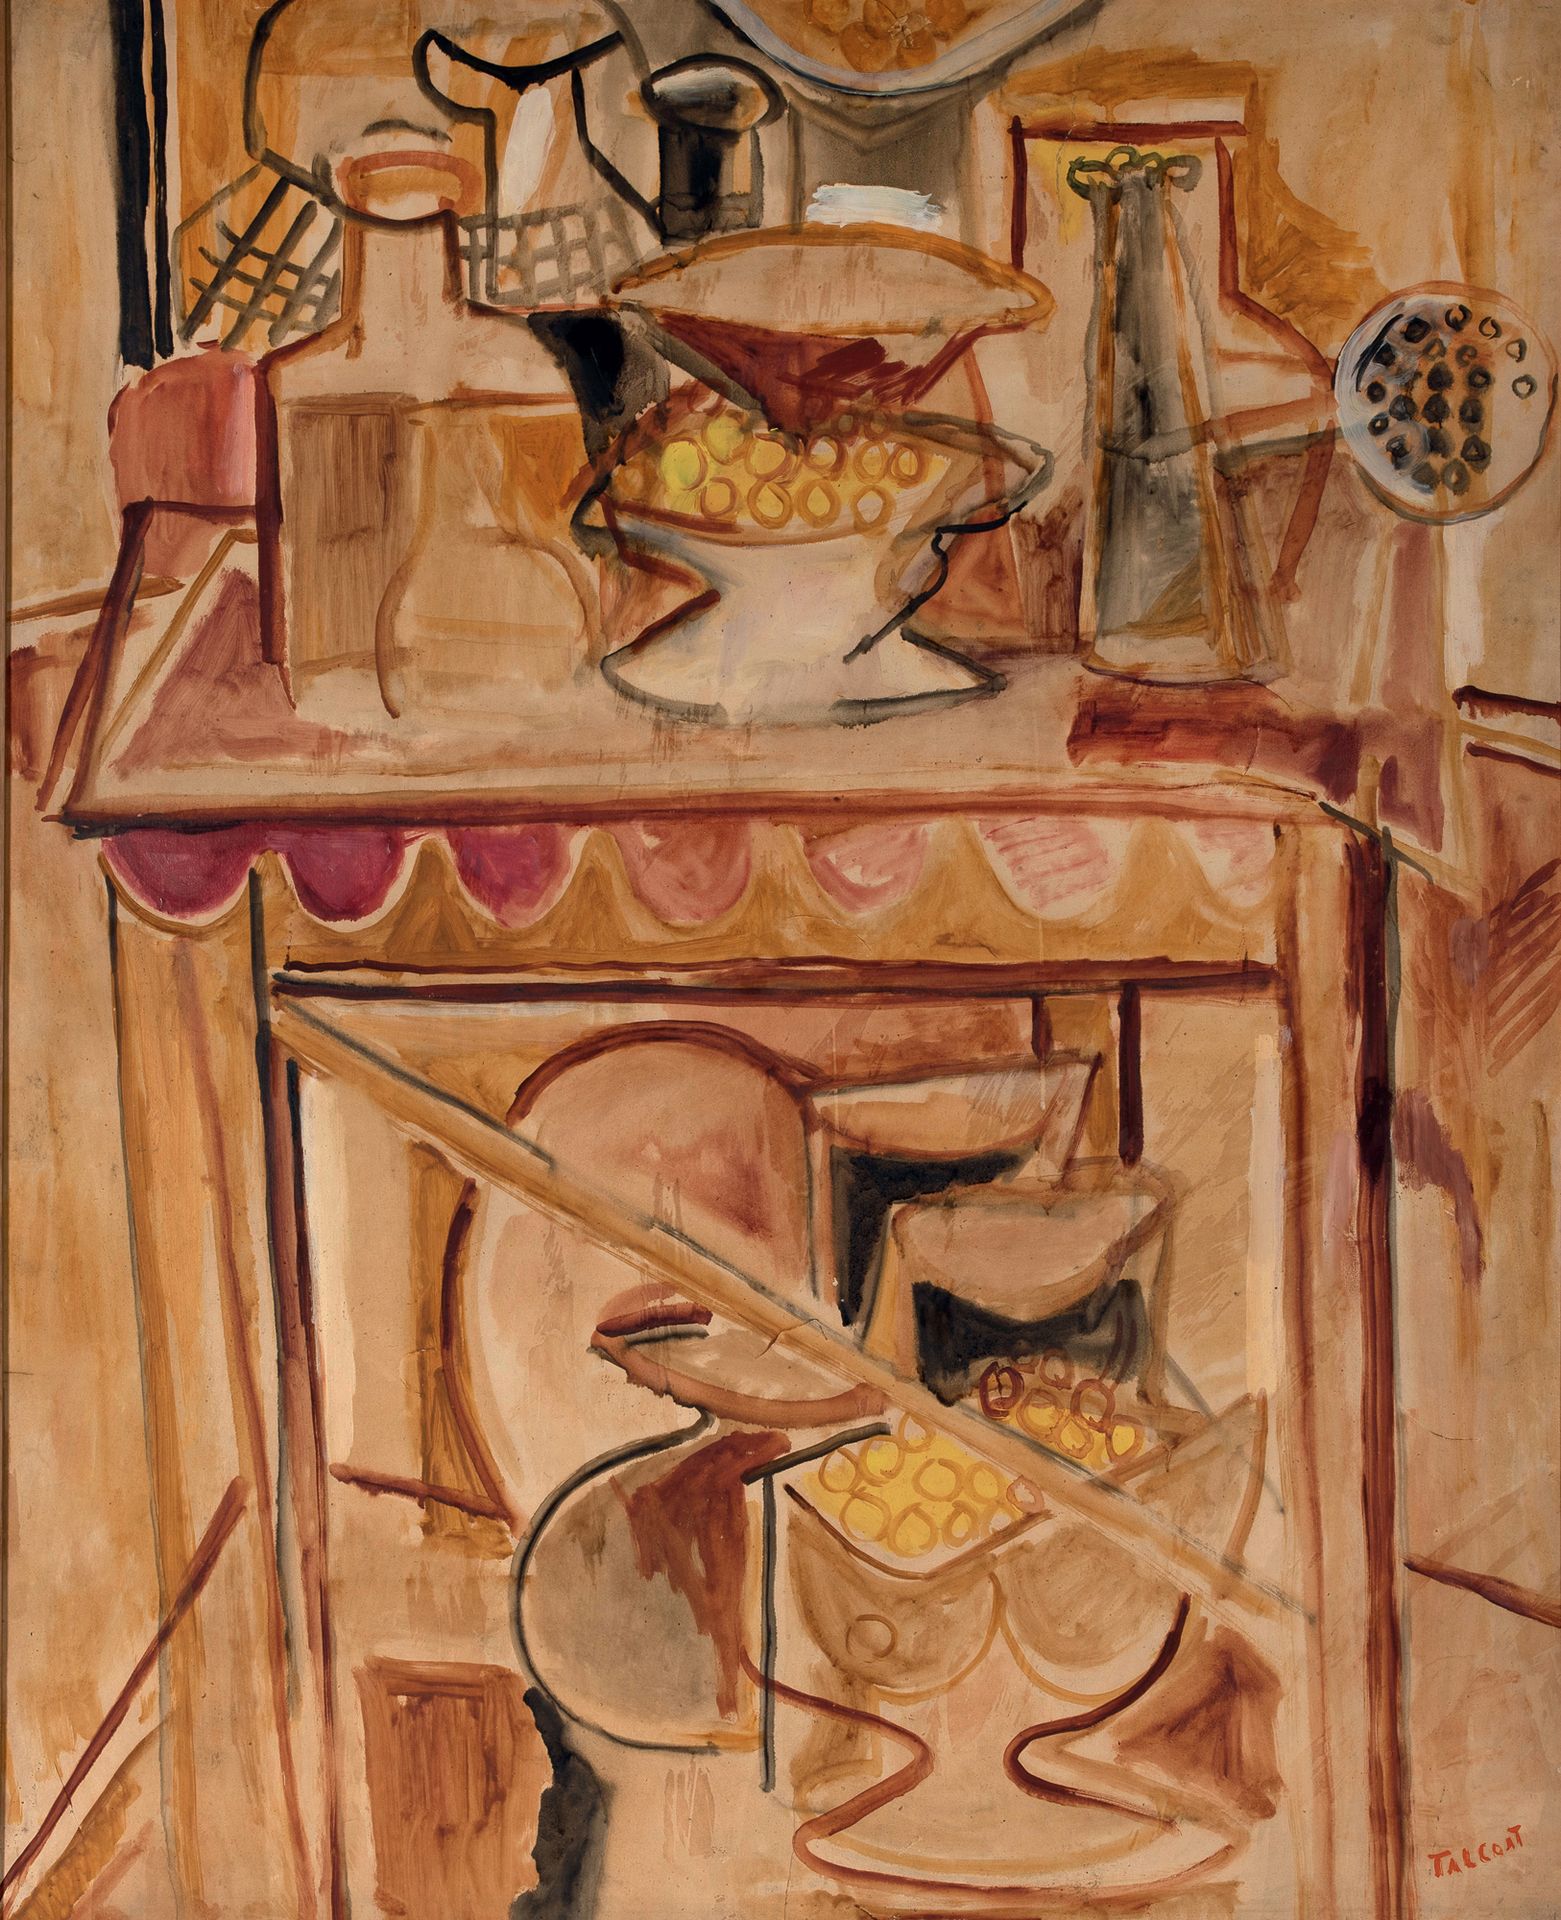 PIERRE TAL COAT (1905-1985) - Still life with a cup, 1941
Oil on canvas, signed &hellip;